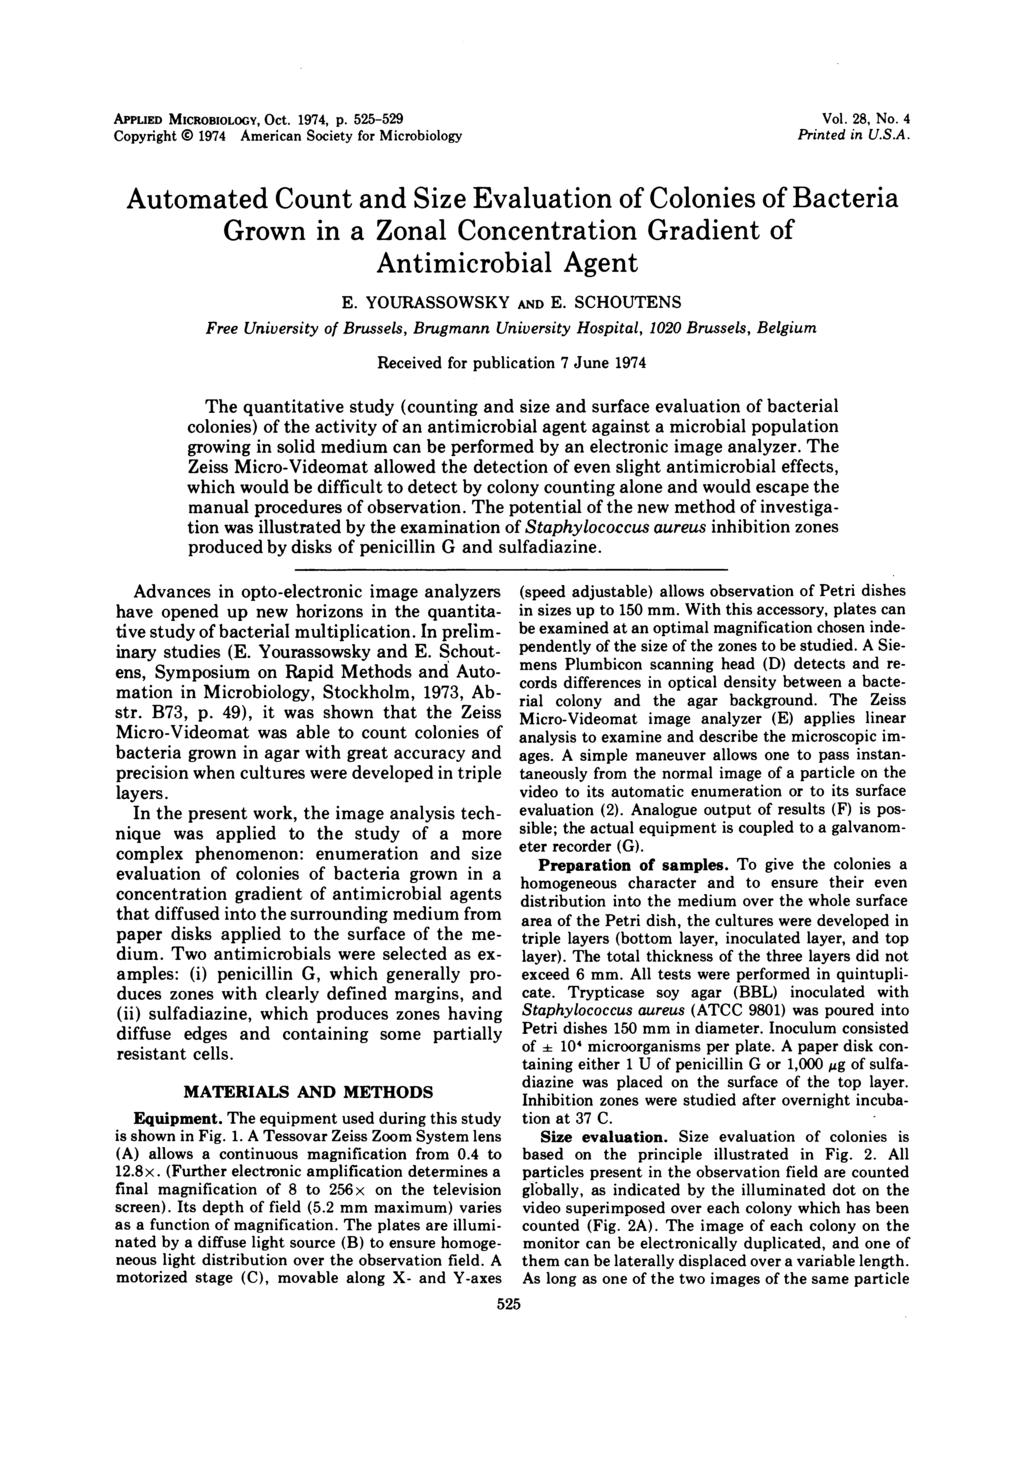 APPLIED MICROBIOLOGY, Oct. 1974, p. 525-529 Copyright 1974 American Society for Microbiology Vol. 28, No. 4 Printed in U.S.A. Automated Count and Size Evaluation of Colonies of Bacteria Grown in a Zonal Concentration Gradient of Antimicrobial Agent E.